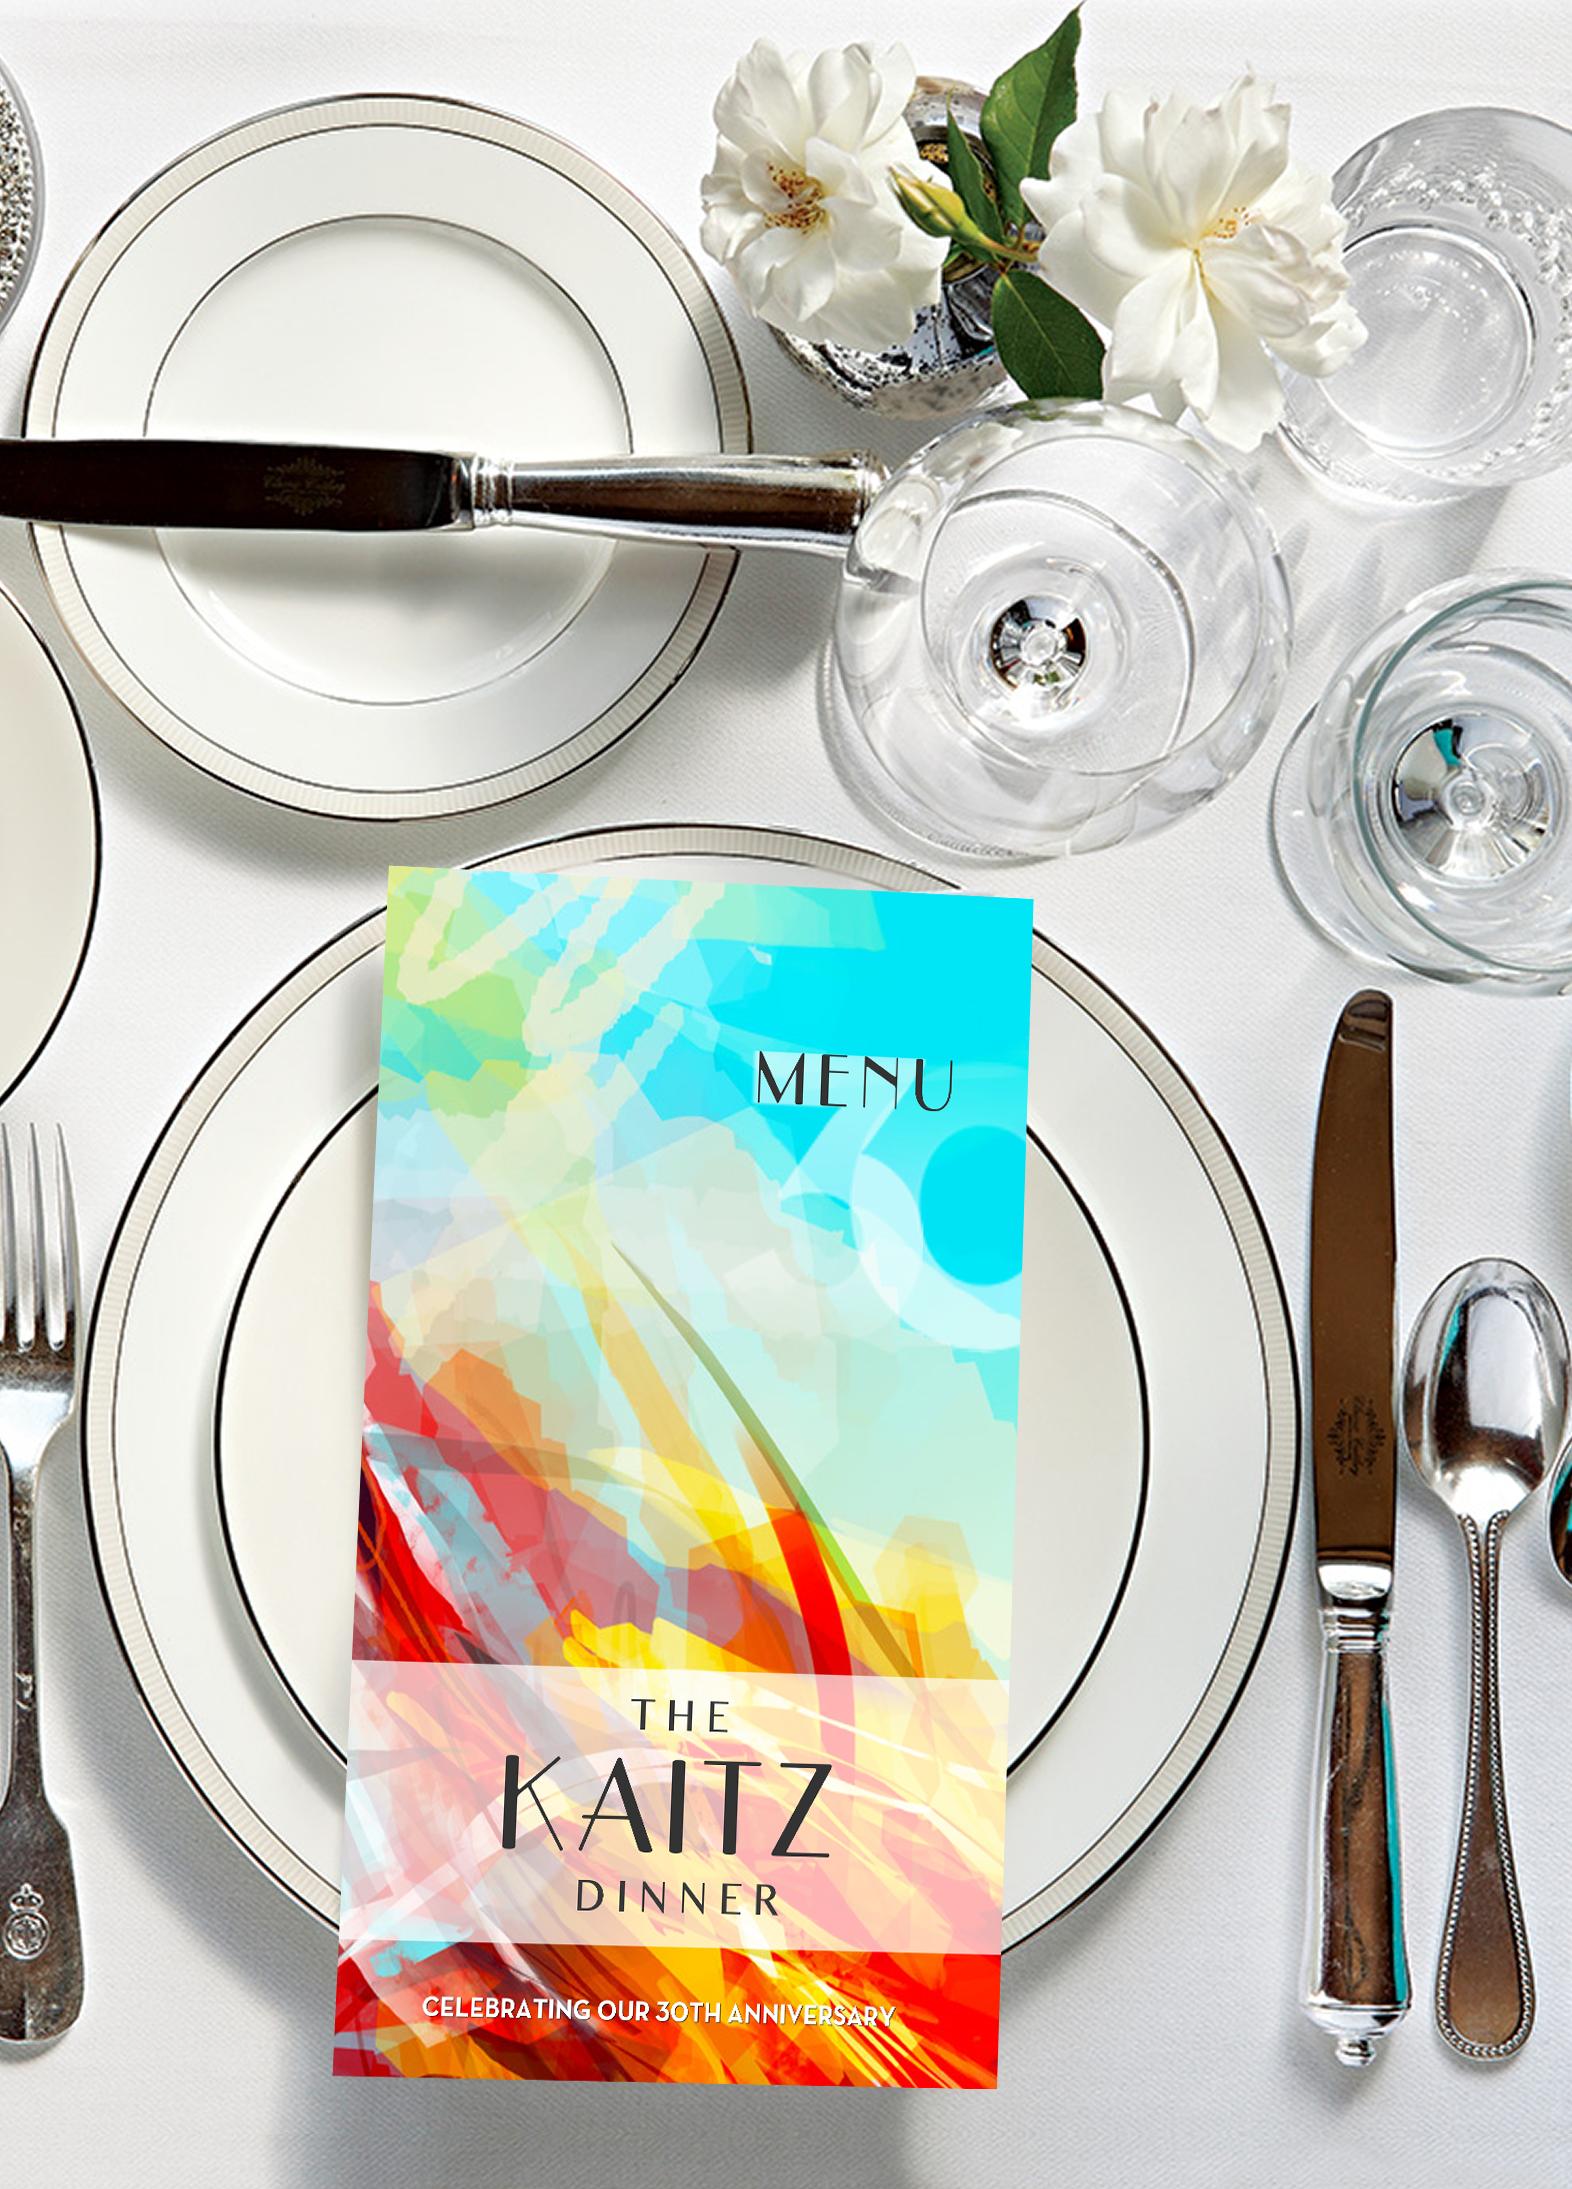 Table place setting with Kaitz Dinner Menu on the large plate